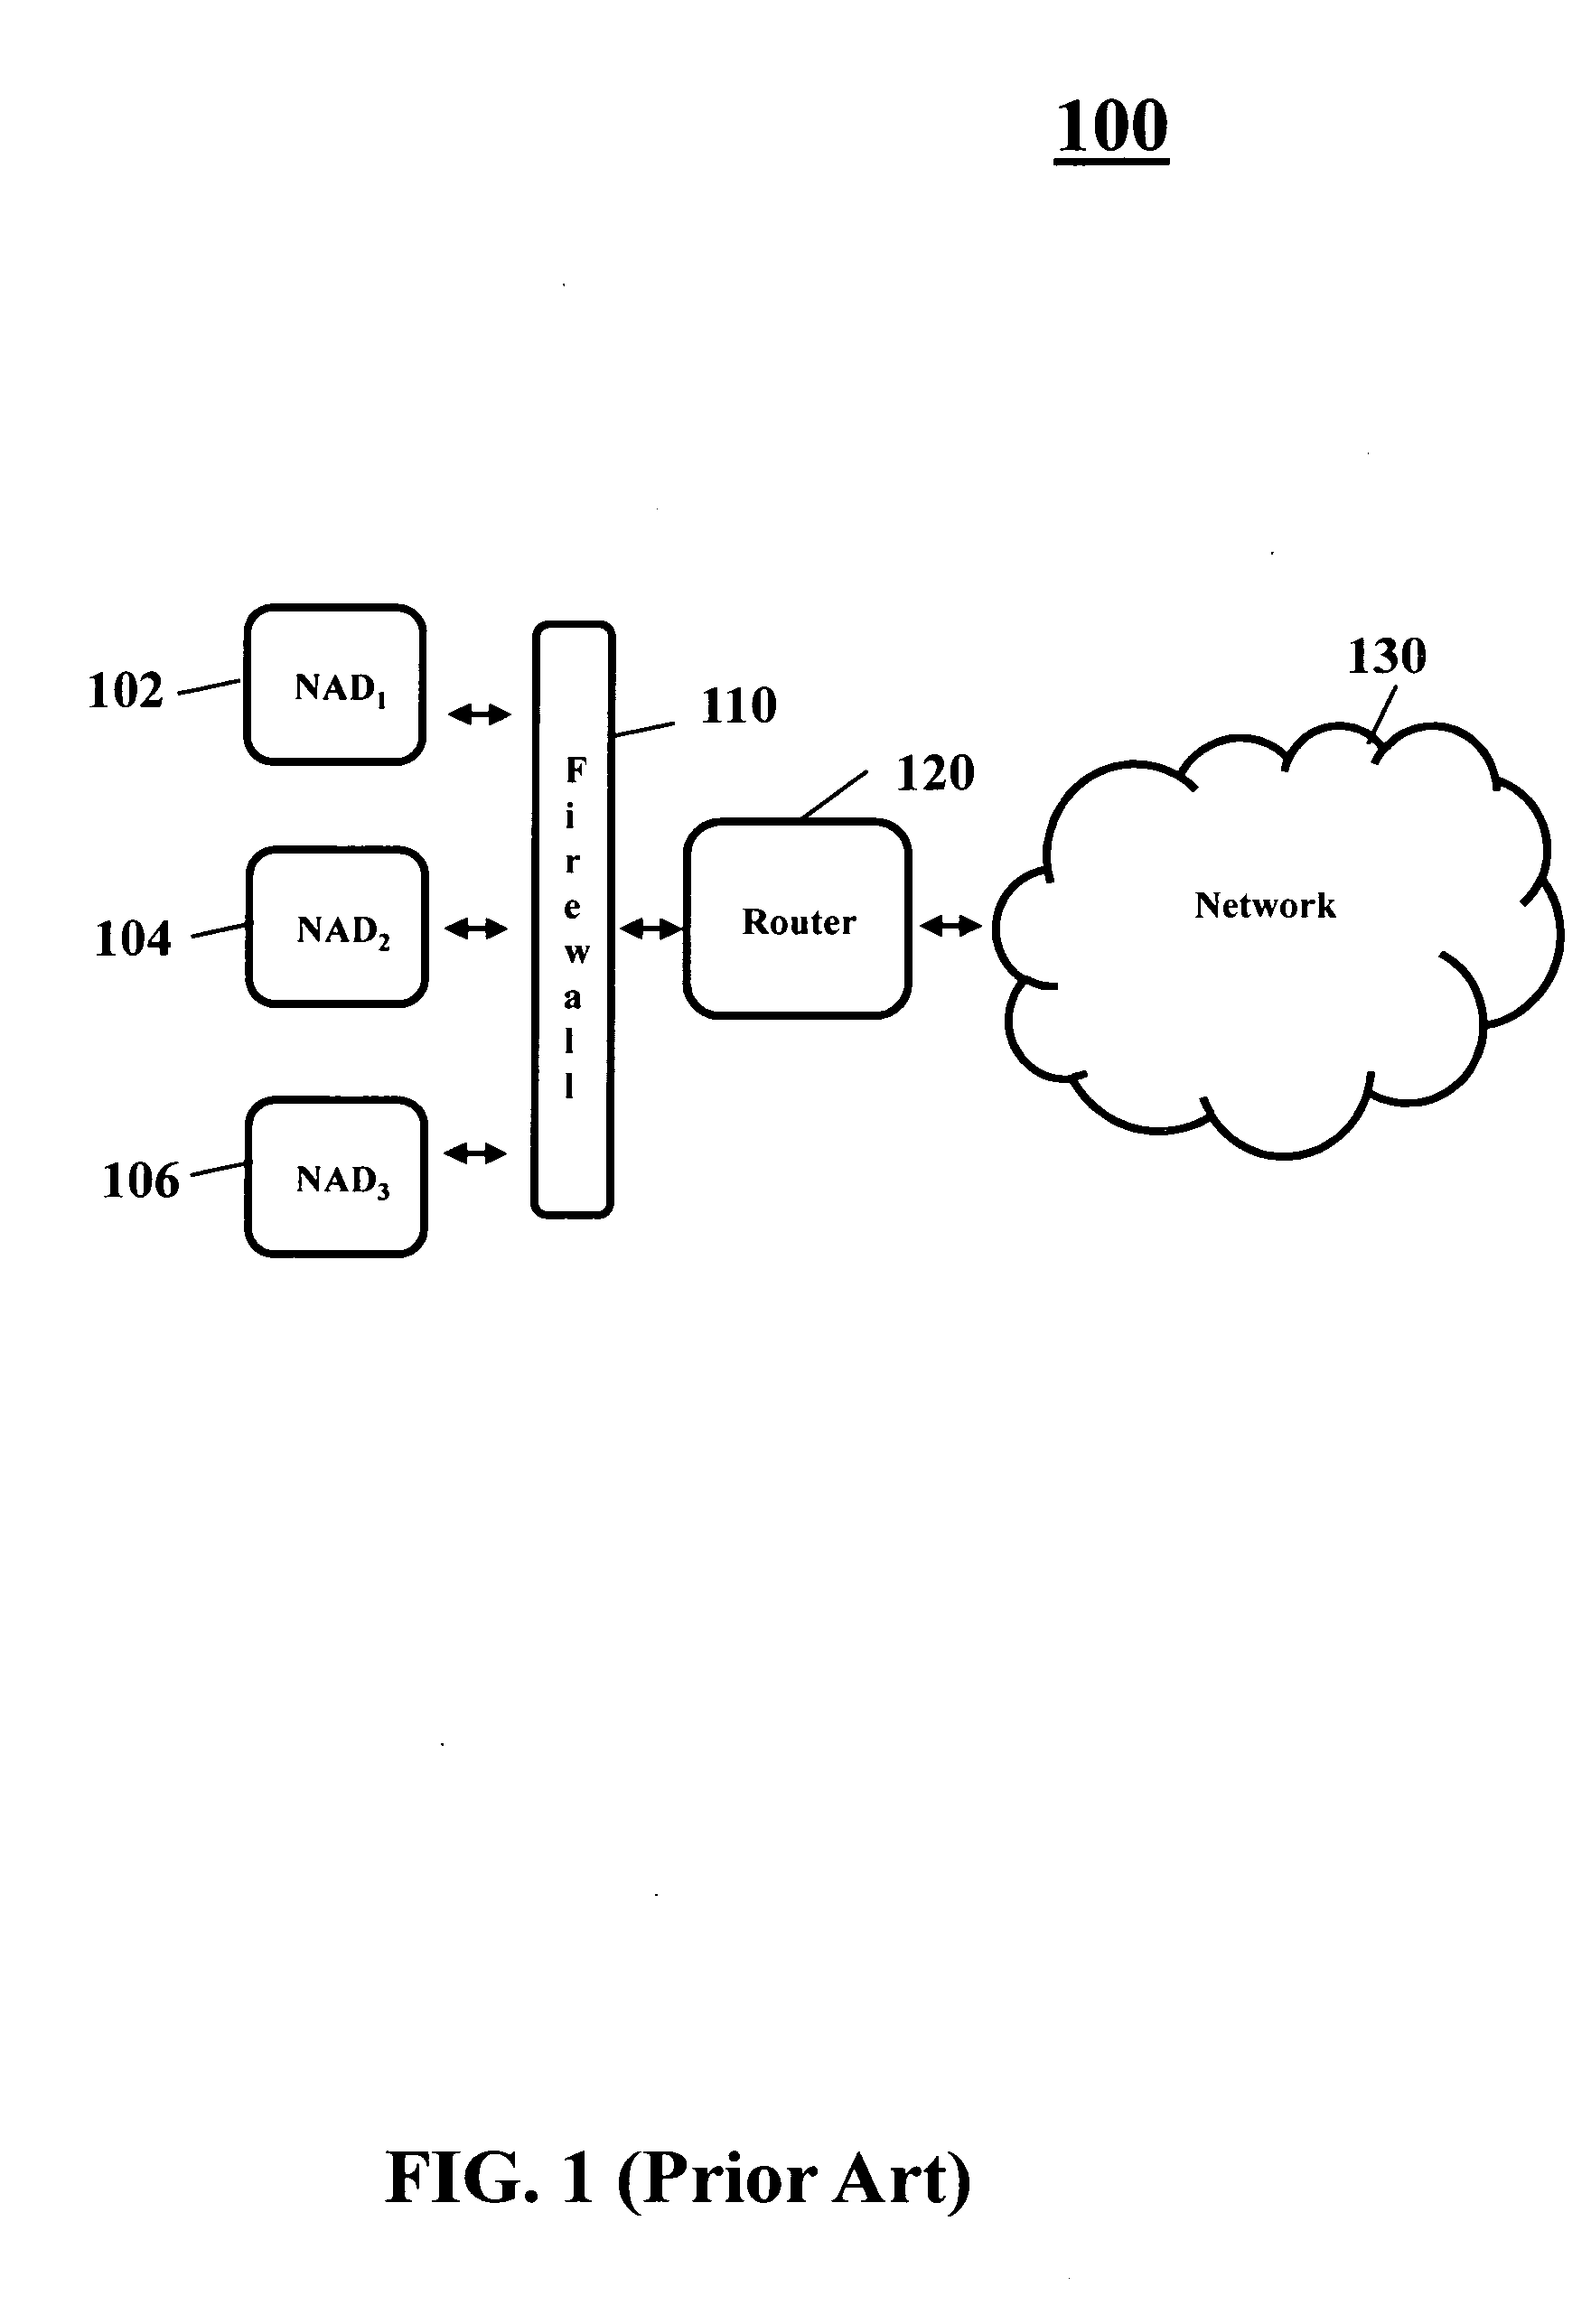 Independent role based authorization in boundary interface elements